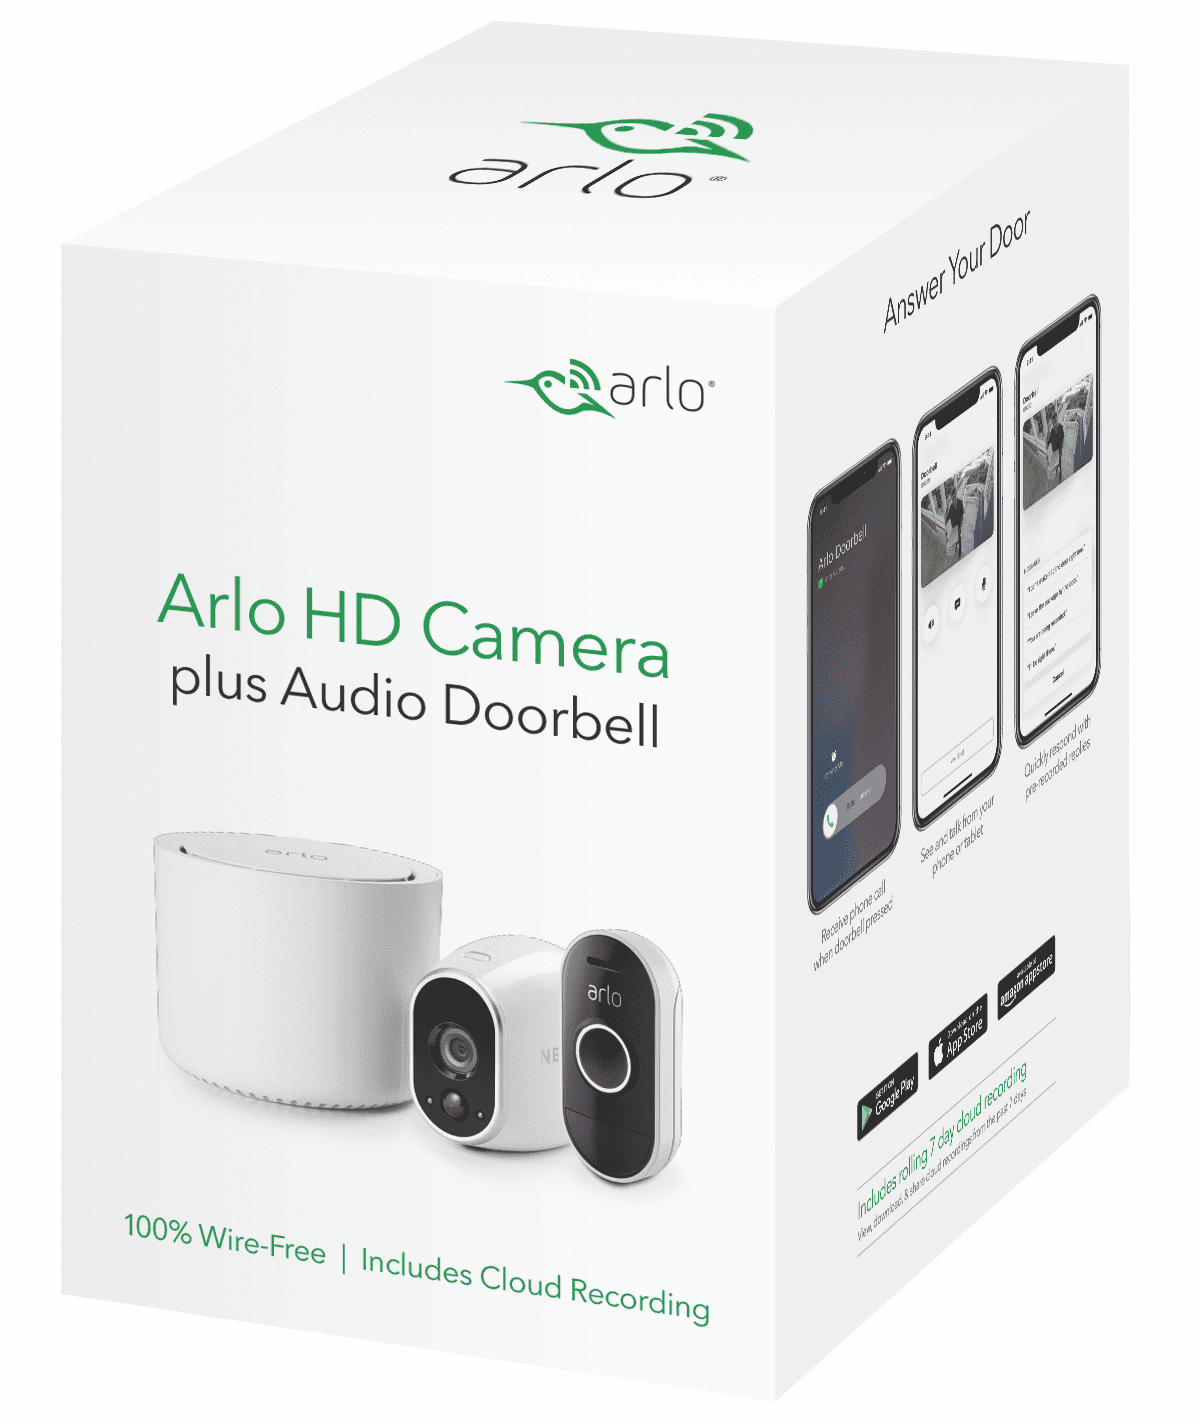 nvr camera system with audio